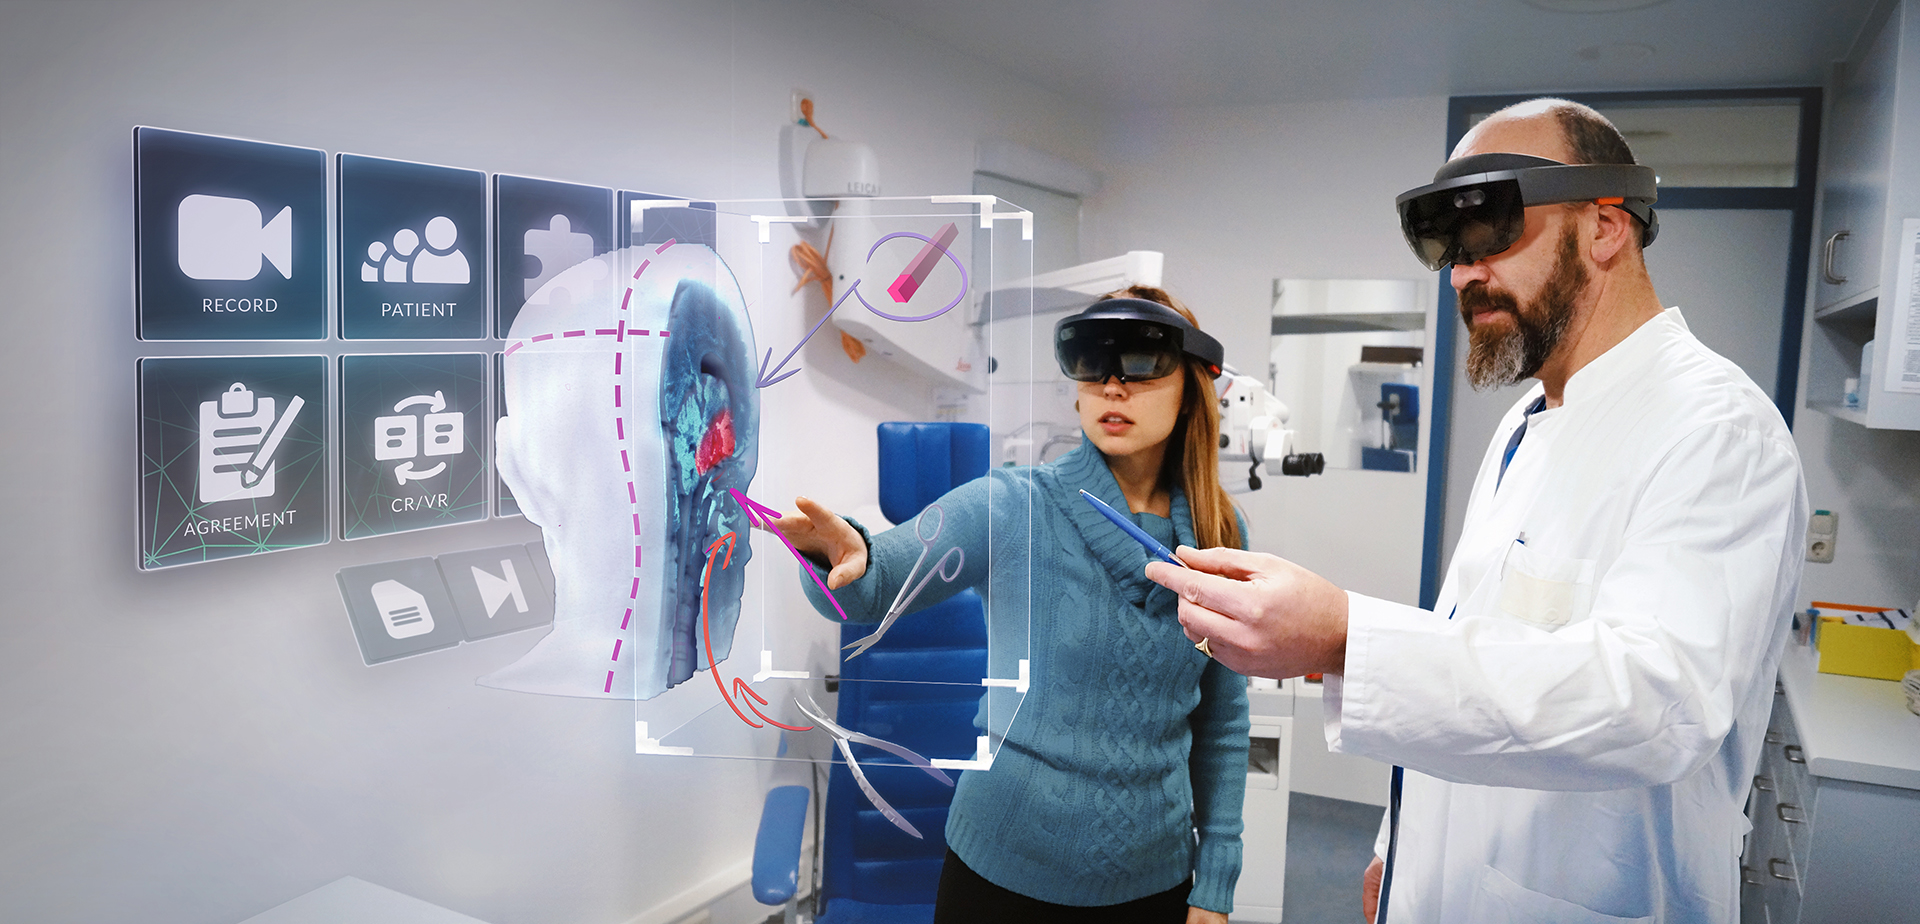 Augmented Reality And Virtual Reality Market Rising Trends, Technology Research and Precise Outlook 2019 to 2026